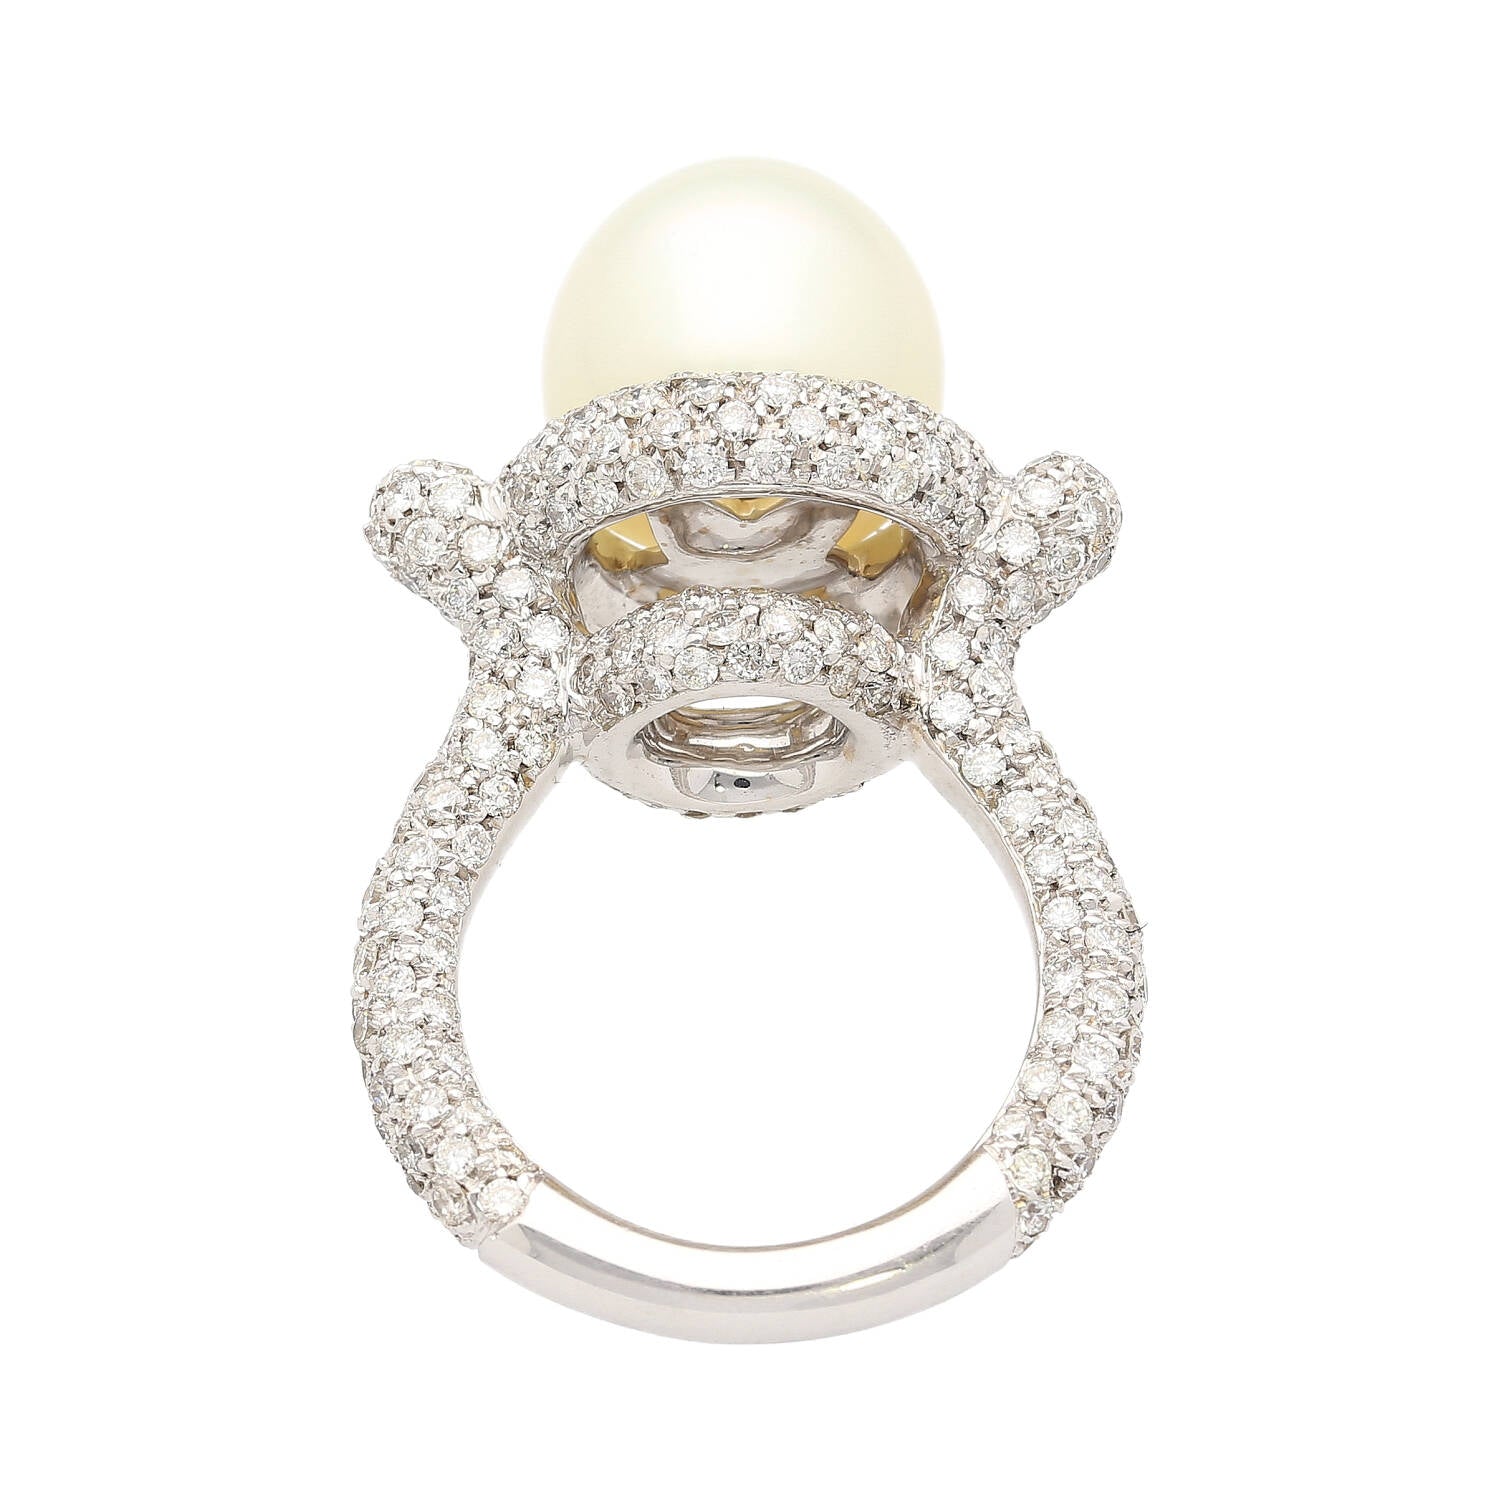 12.3MM SouthSea White Pearl and Round Cut Pave Diamond Ring in 18k White Gold